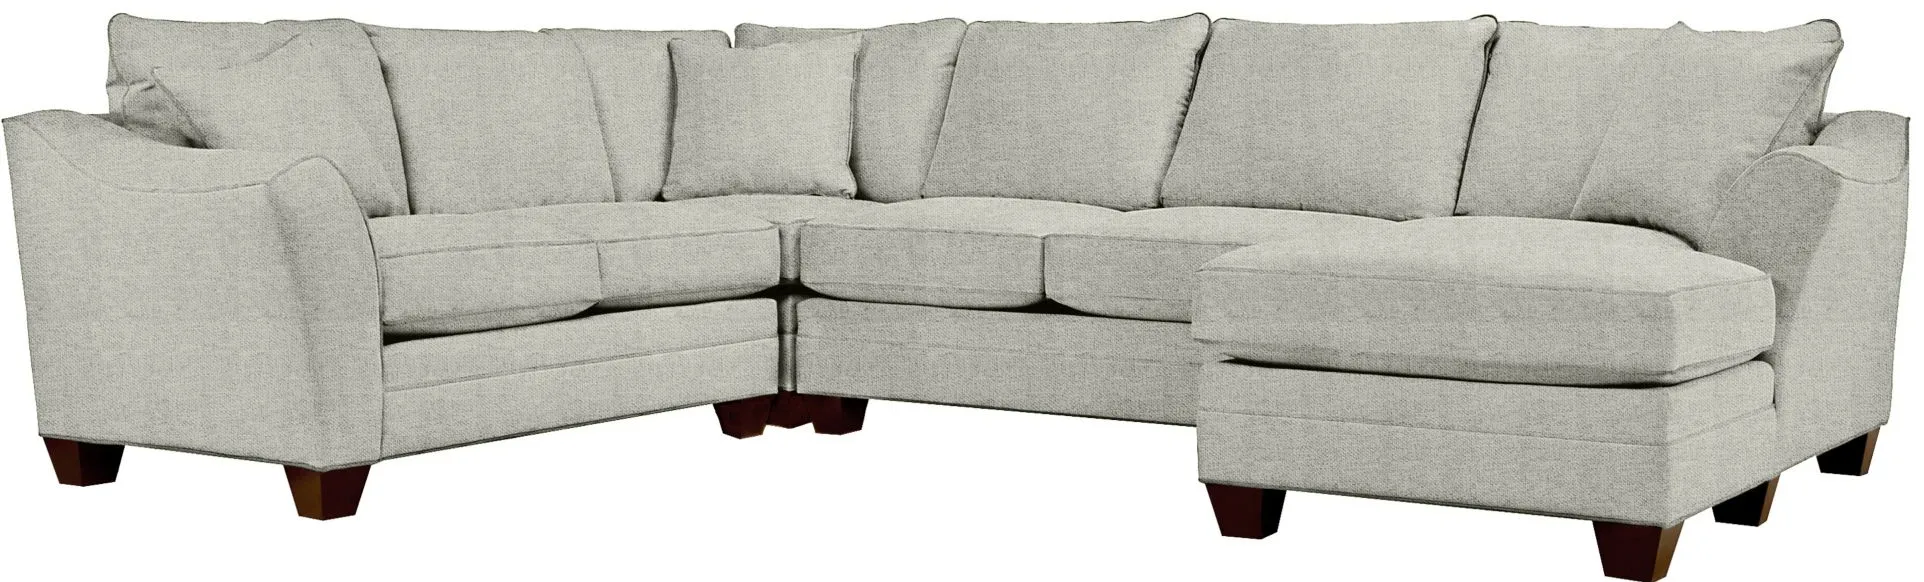 Foresthill 4-pc. Sectional w/ Right Arm Facing Chaise in Elliot Smoke by H.M. Richards